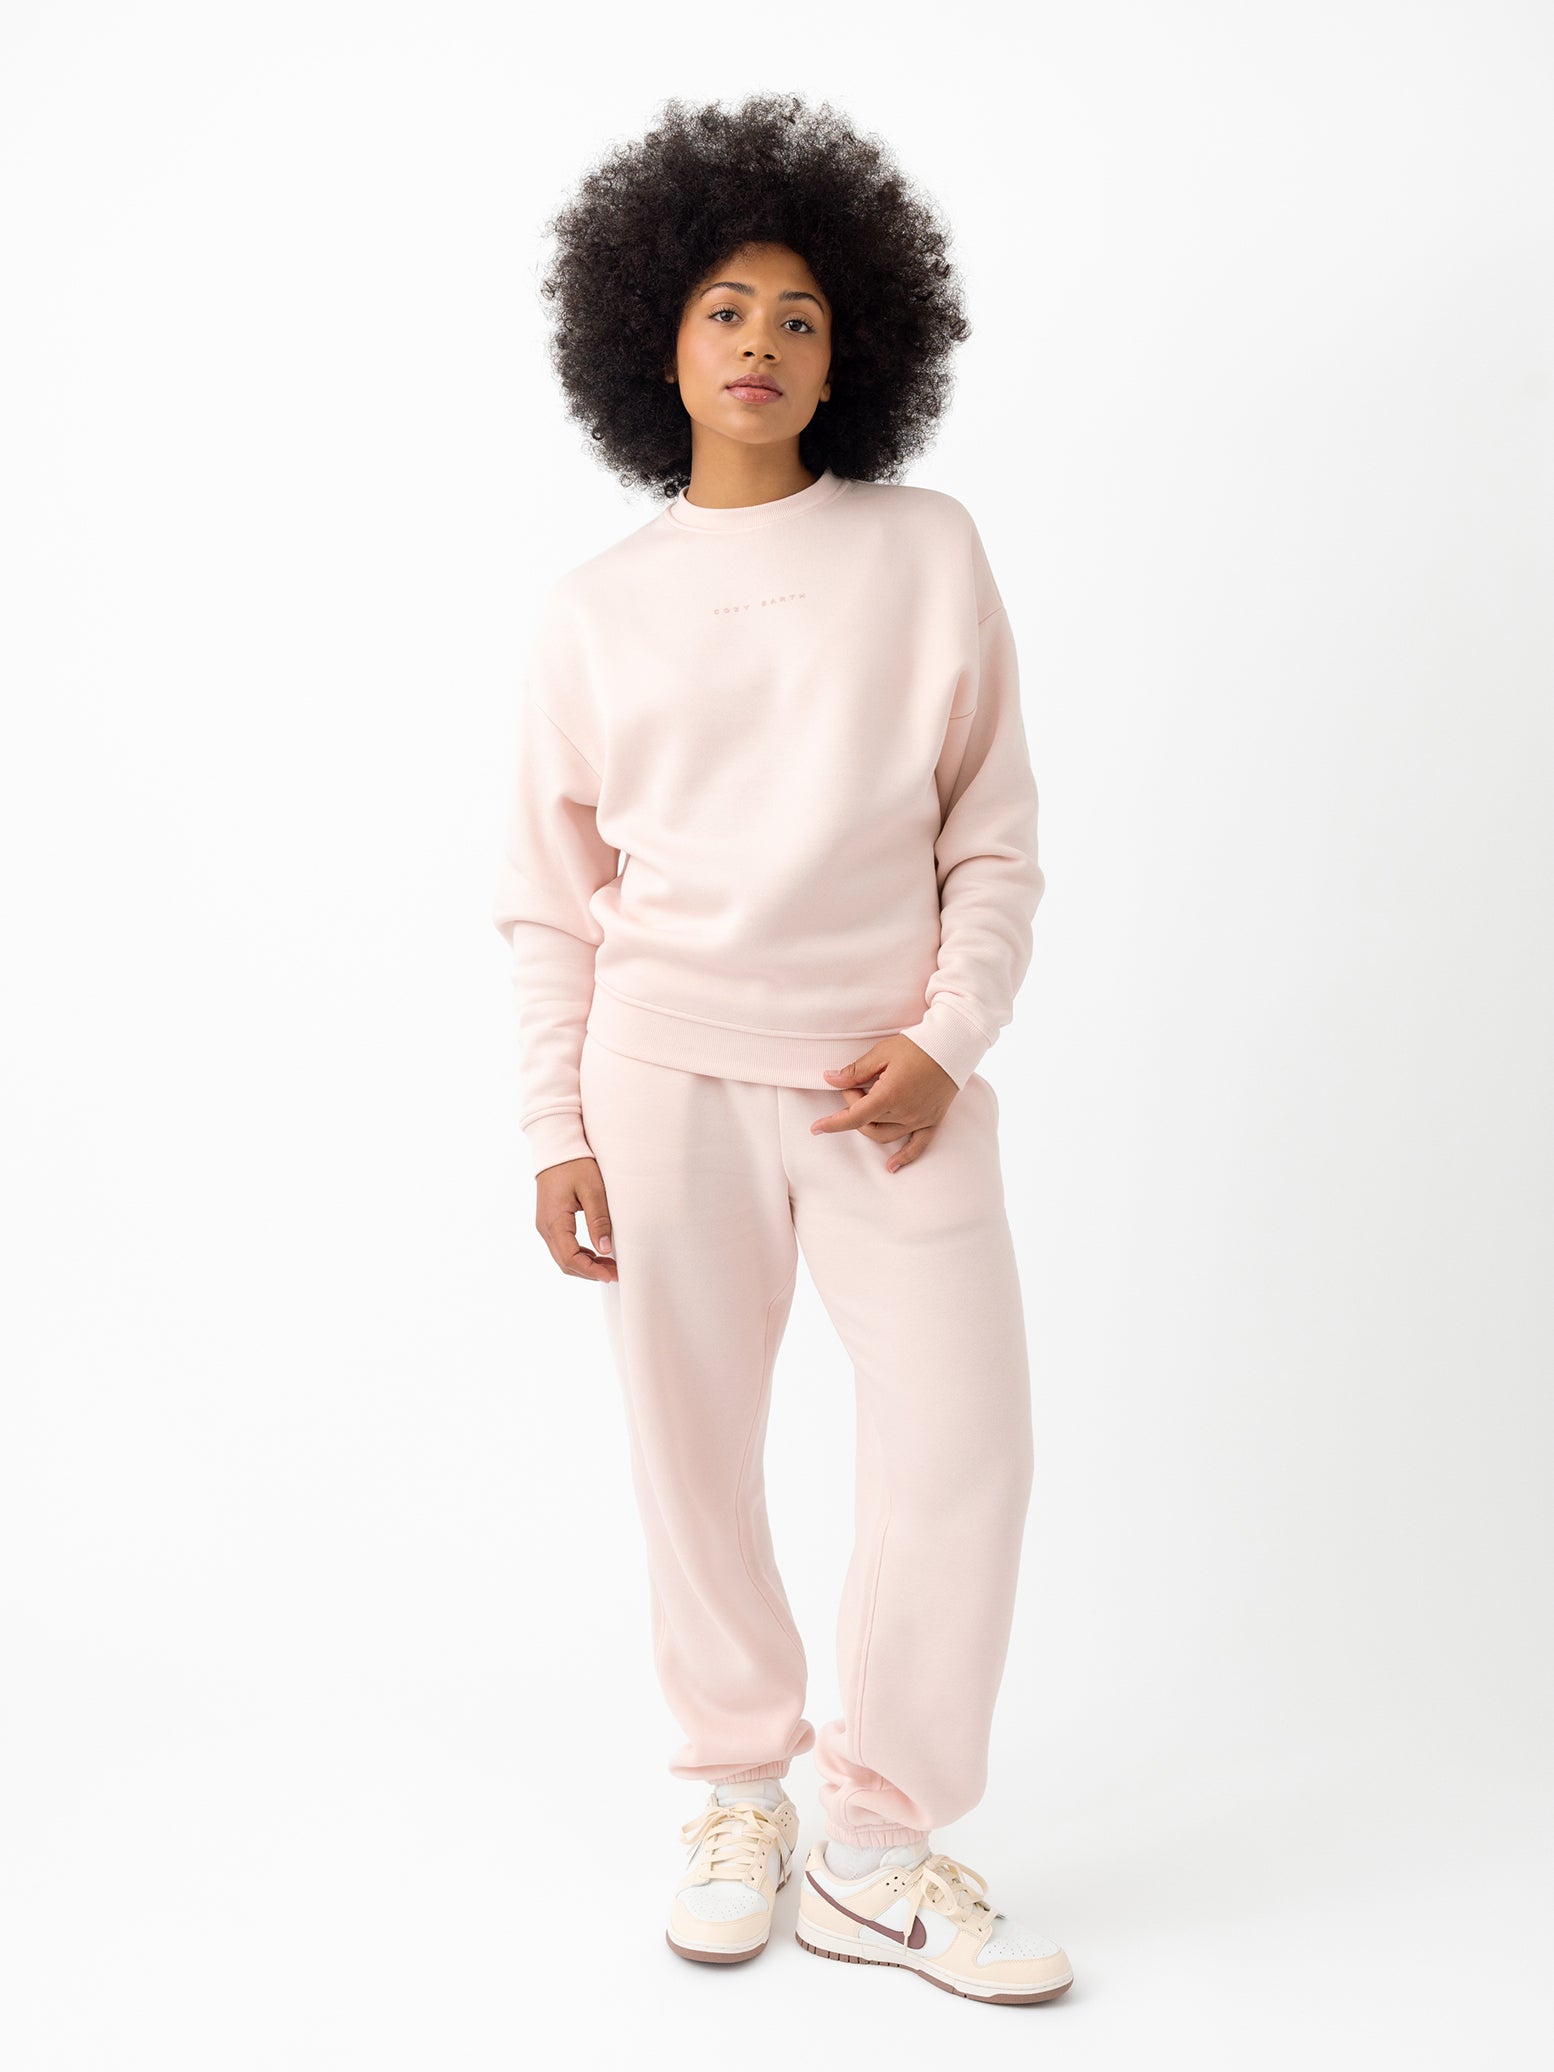 Peony CityScape Joggers. The Joggers are being worn by a female model. The photo is taken with the models hand by the pocket of the joggers. The back ground is a crisp white background. 